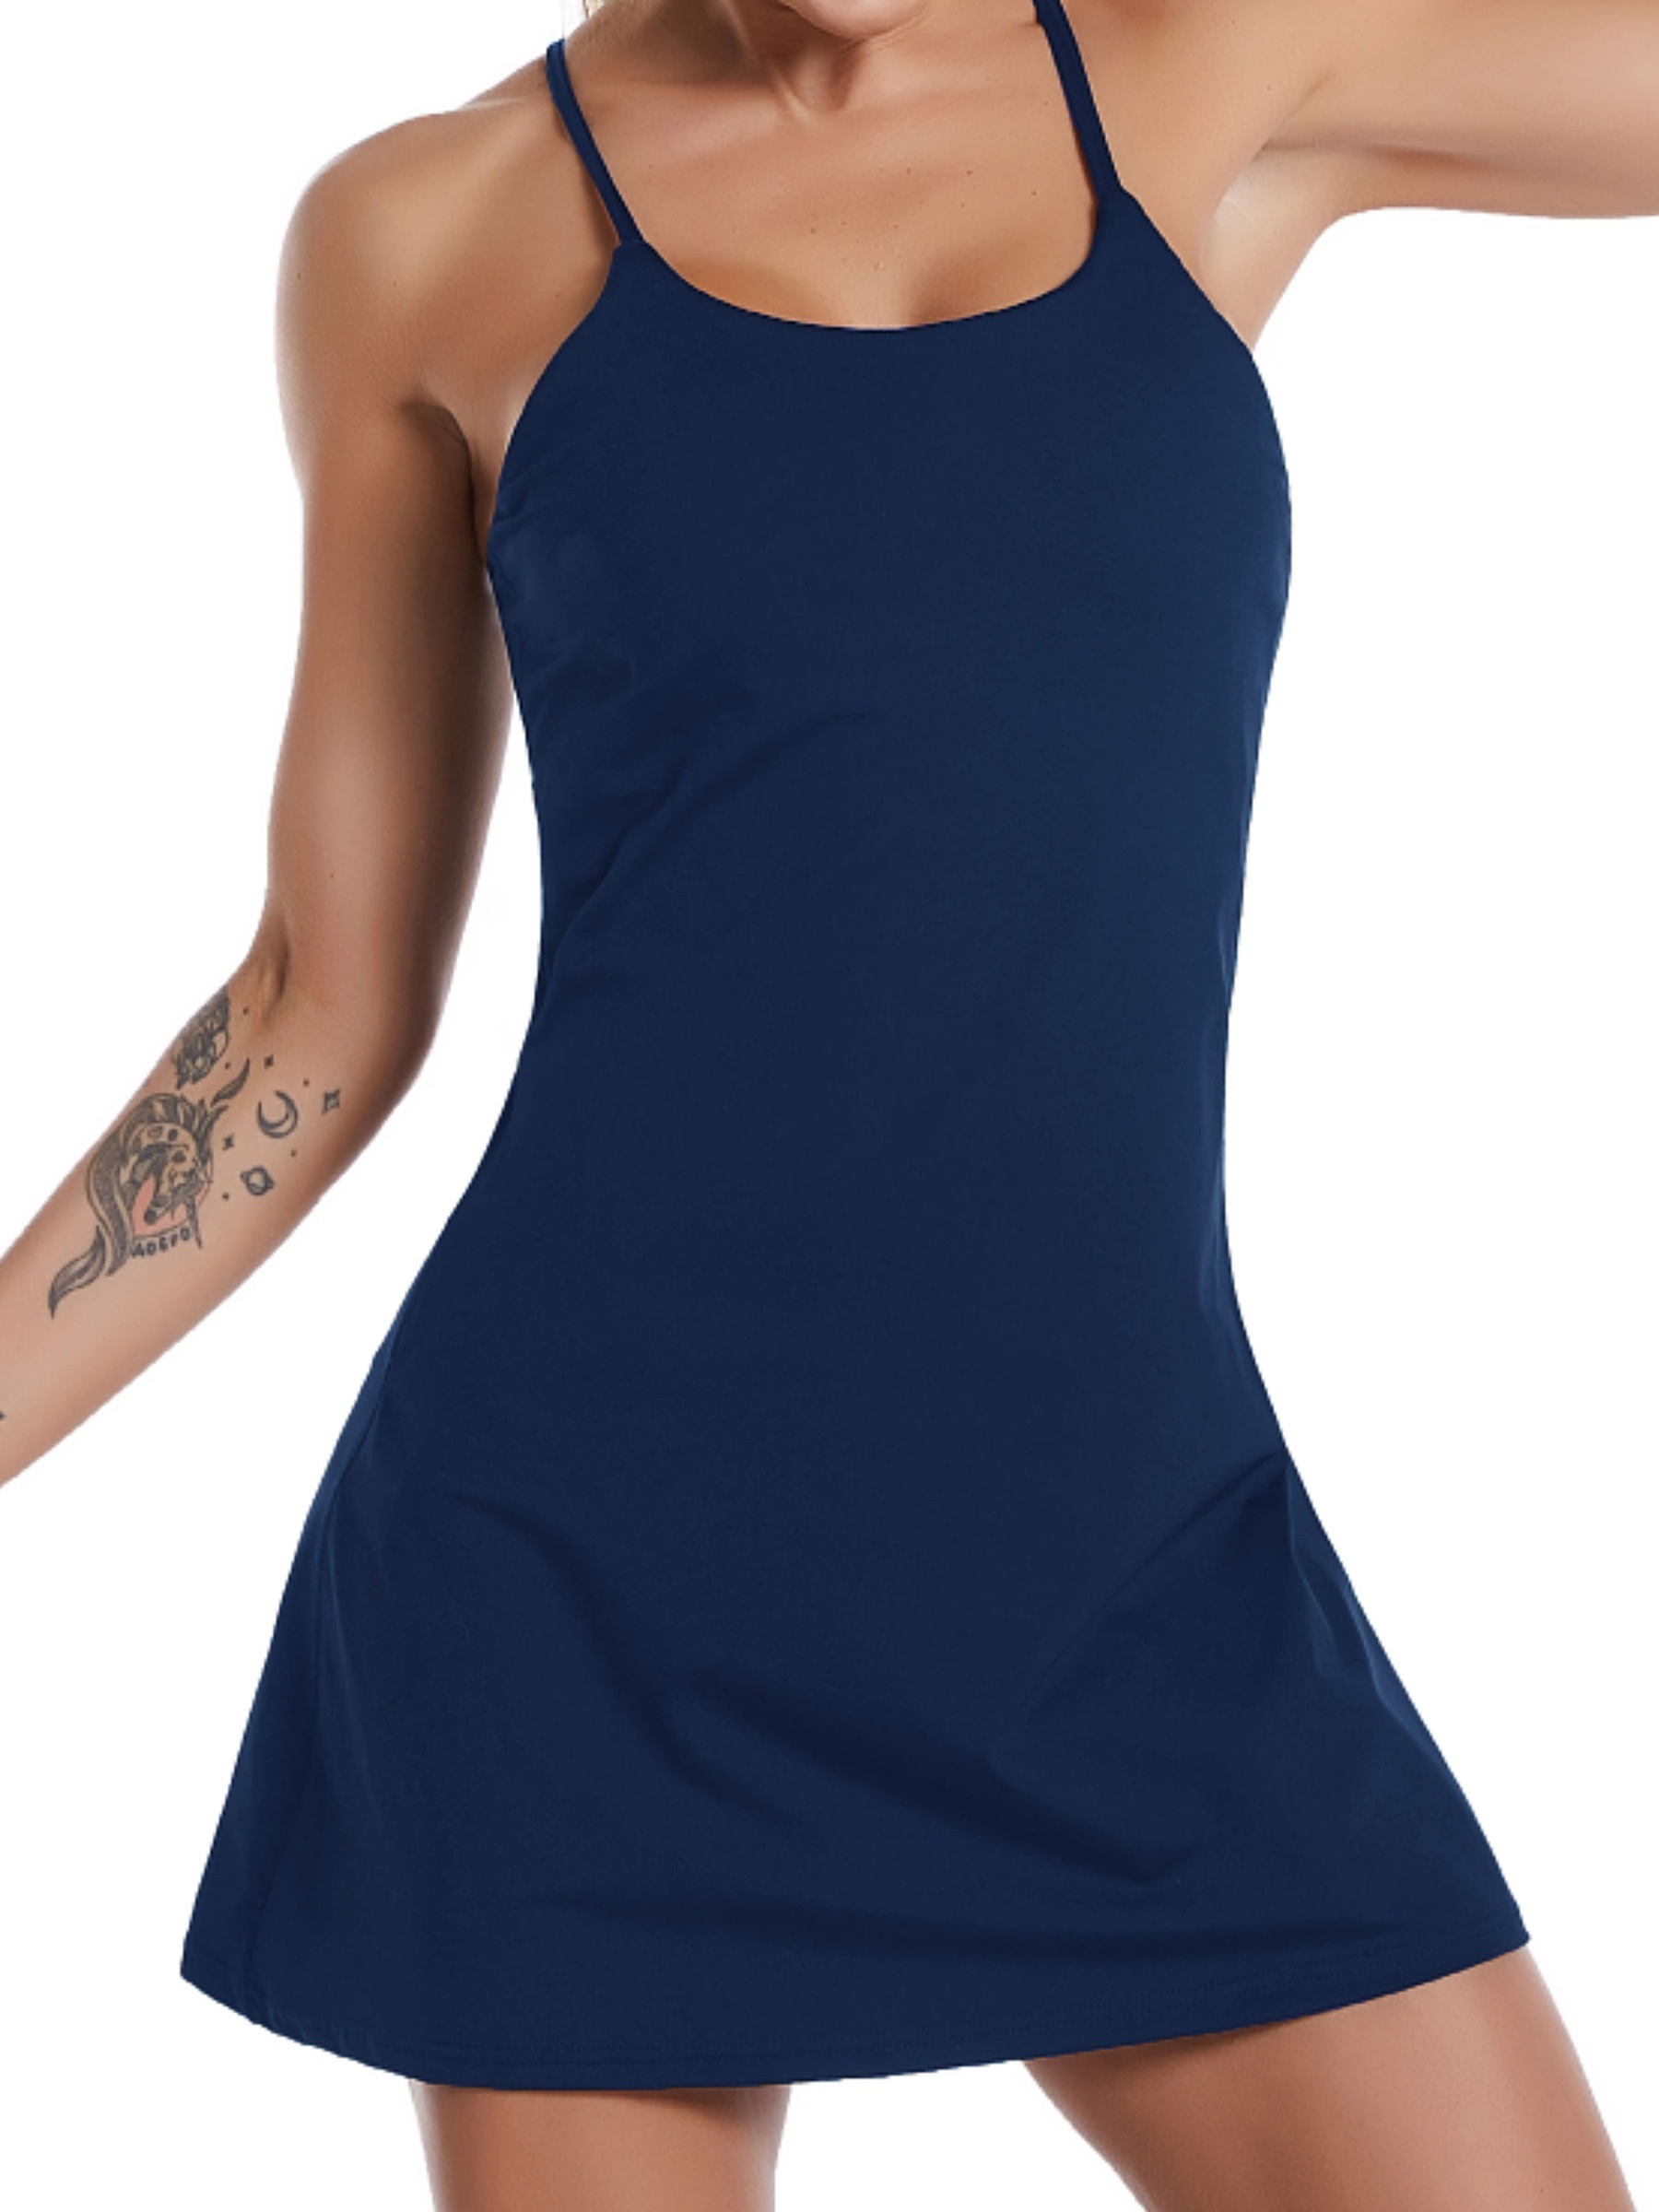  Womens Tennis Dress Workout Dress with Built-in Bra & Shorts  Pockets Exercise Dress for Golf Yoga Dresses for Women,Blue,XS/2(Bust:78cm)  : Clothing, Shoes & Jewelry